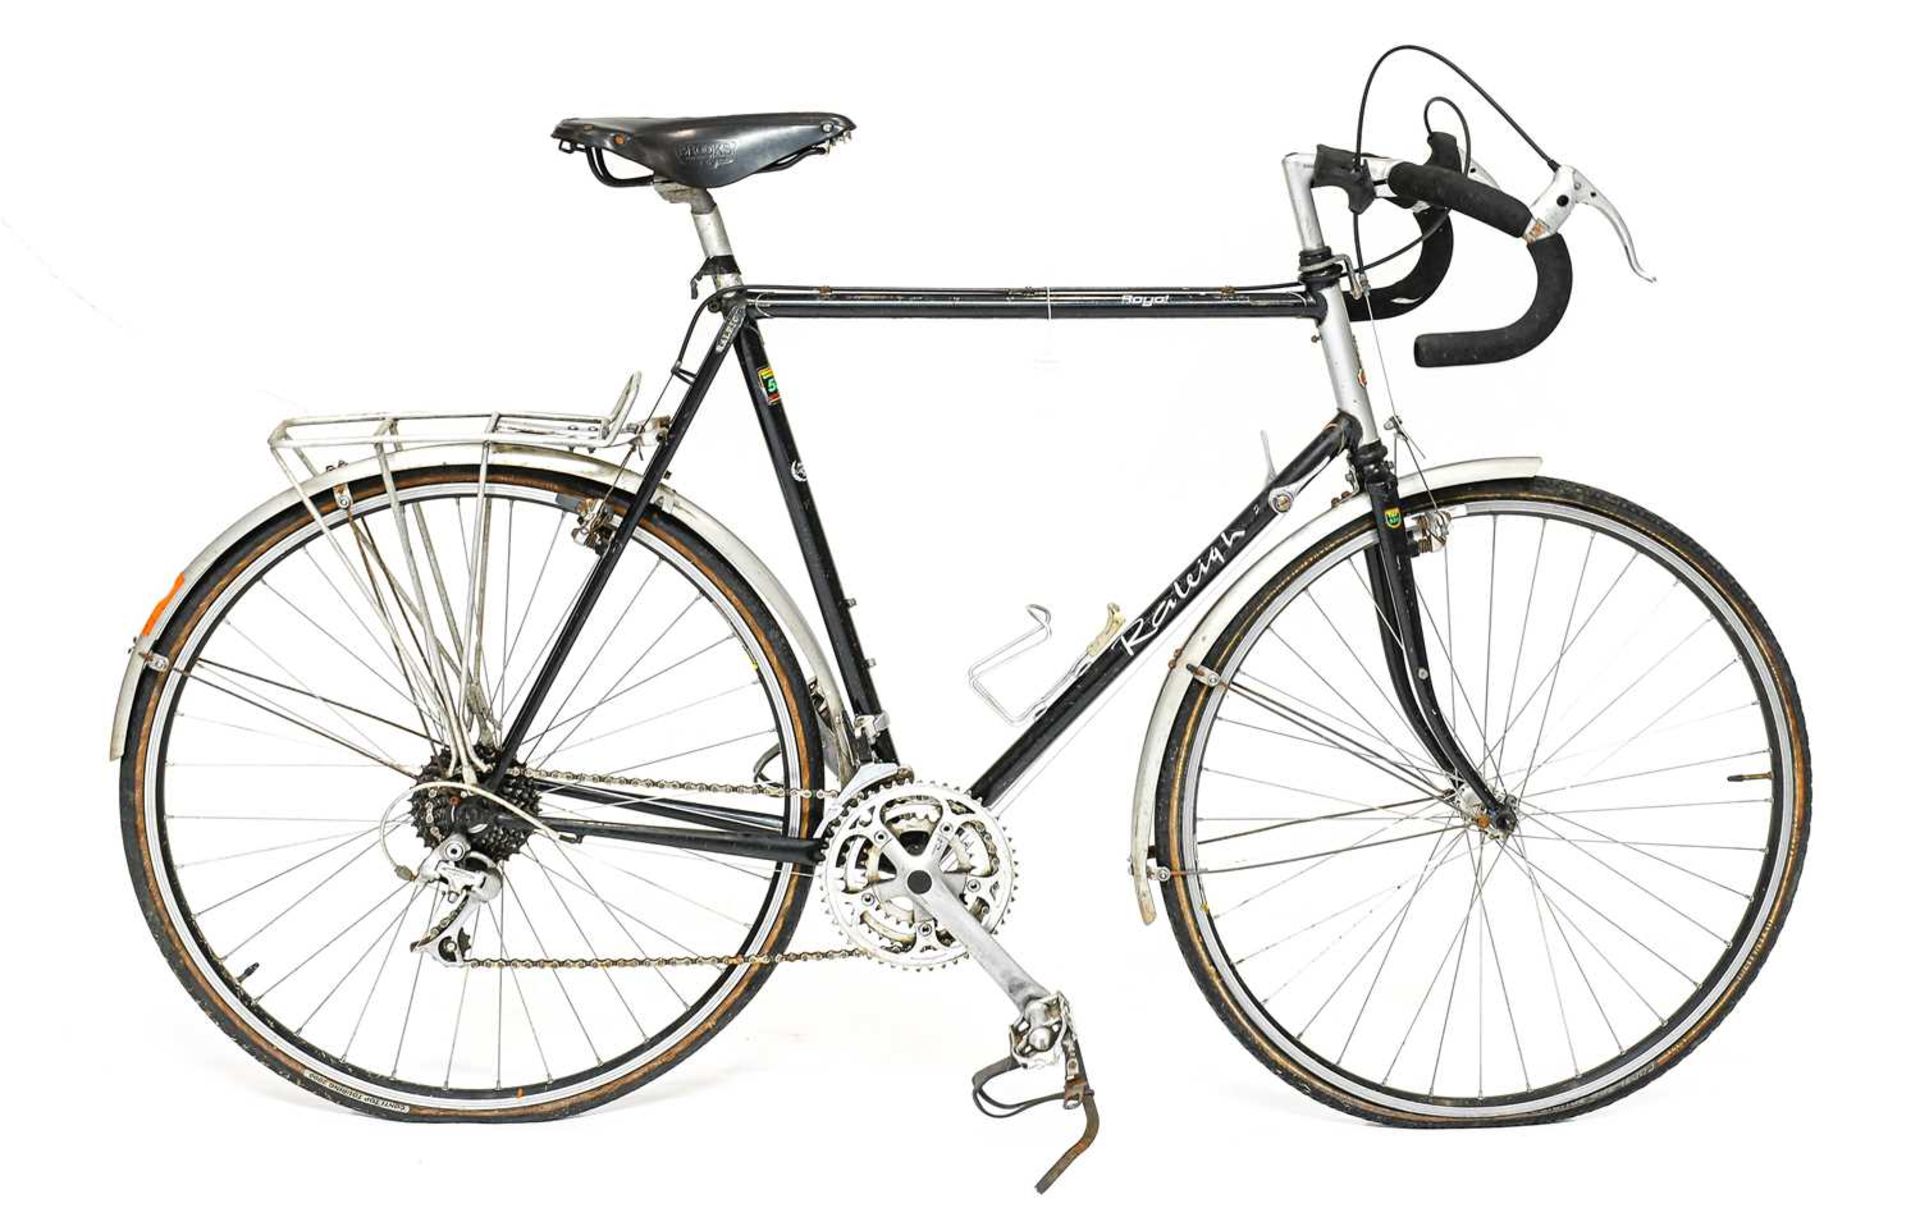 A Gent's Raleigh 531 Reynolds Super Tourist Racing Cycle, and a Gent's Peugeot Cadre Allege Racing